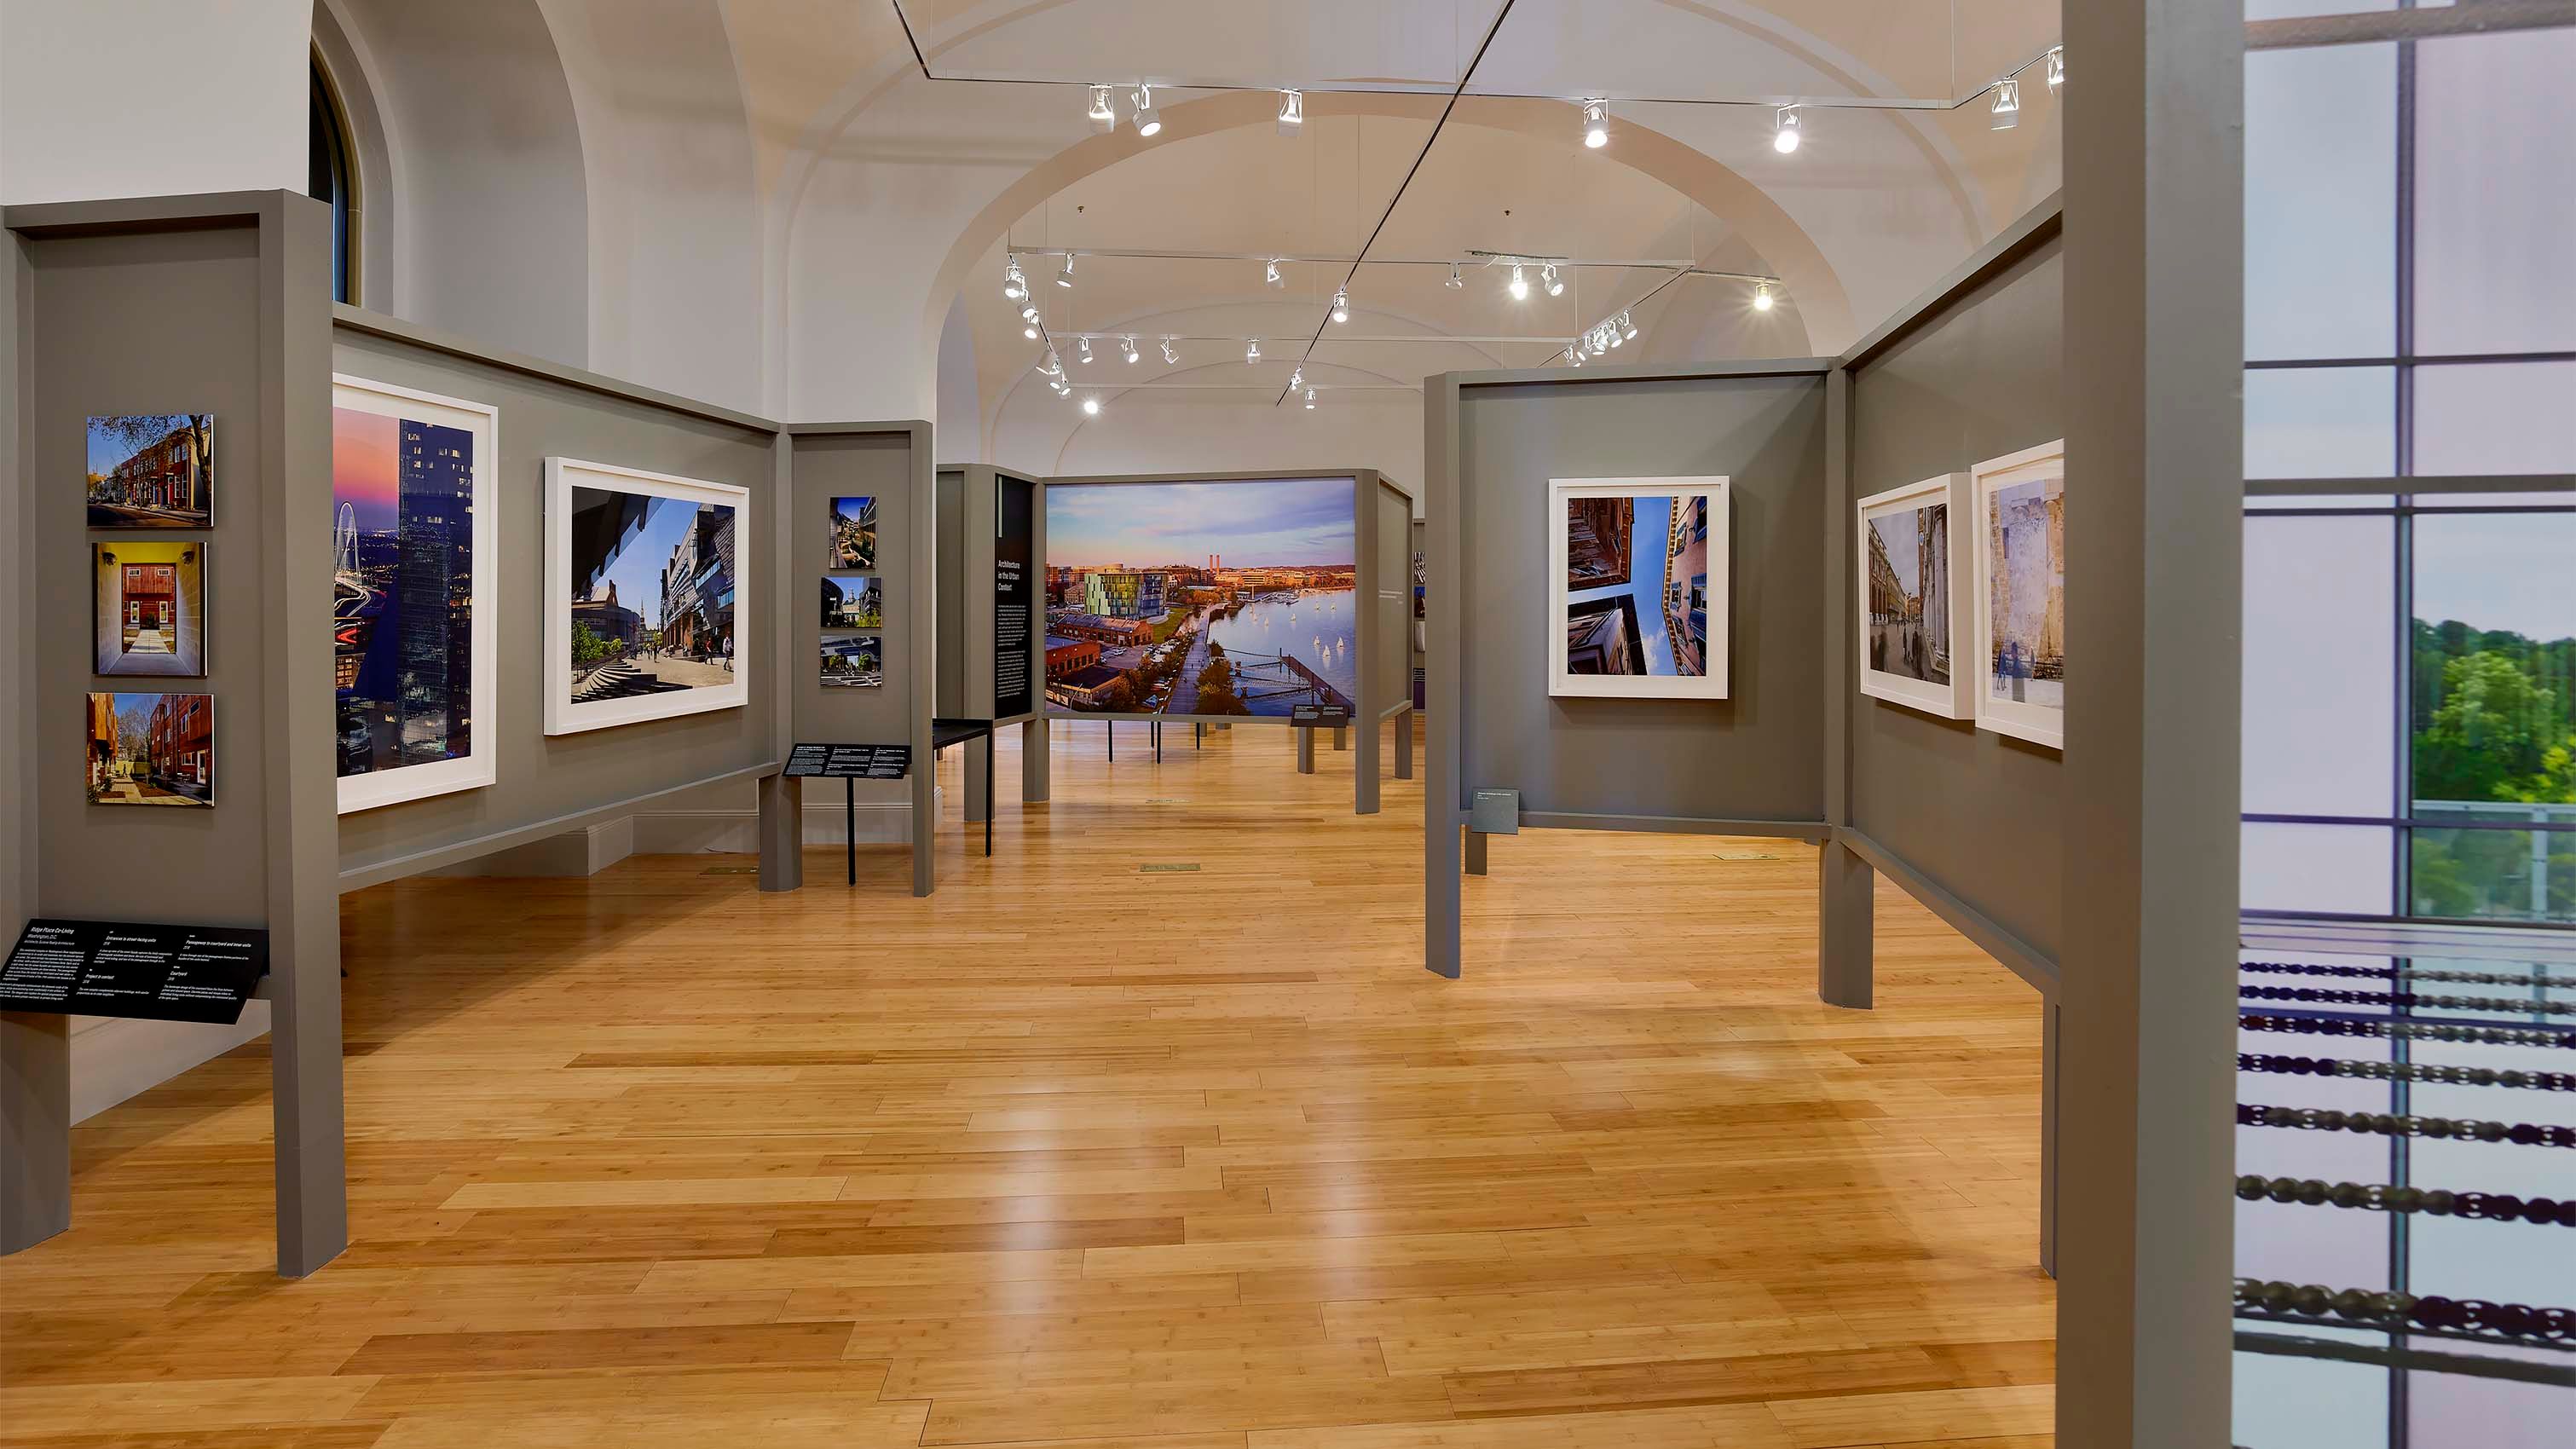 ALAN KARCHMER: THE ARCHITECTS' PHOTOGRAPHER EXHIBITION AT THE NATIONAL BUILDING MUSEUM